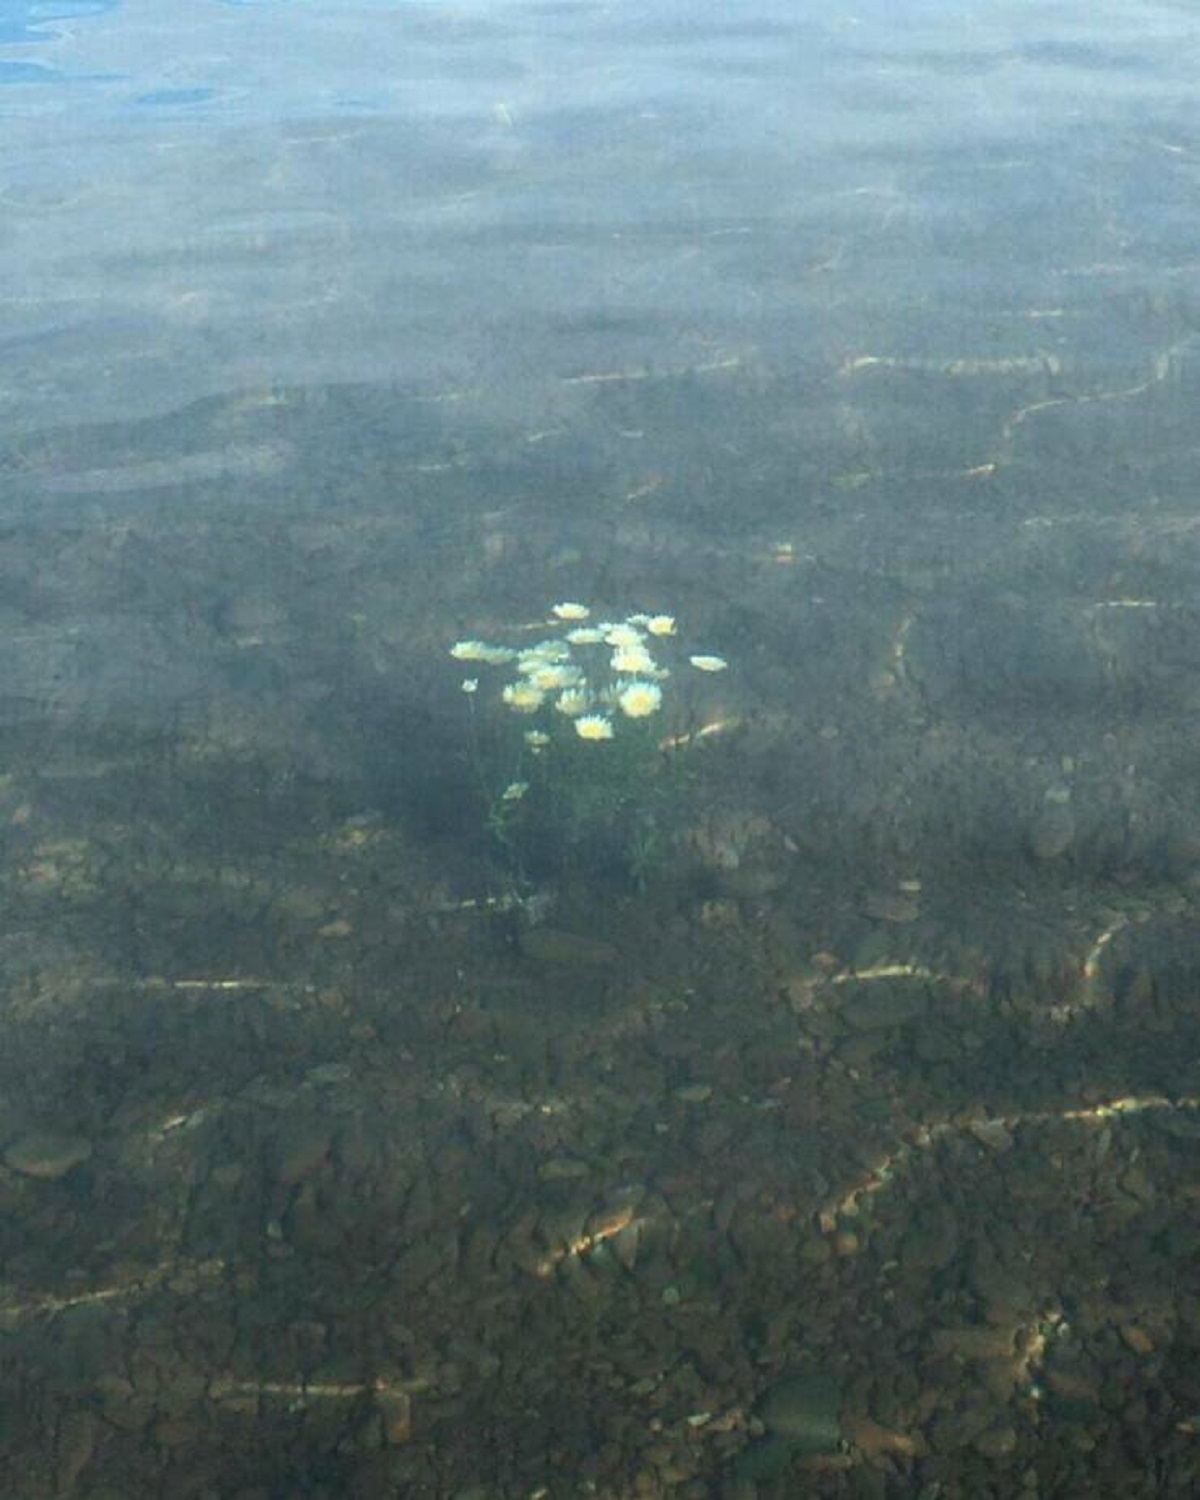 "A Small Patch Of Flowers Growing Perfectly Underwater"